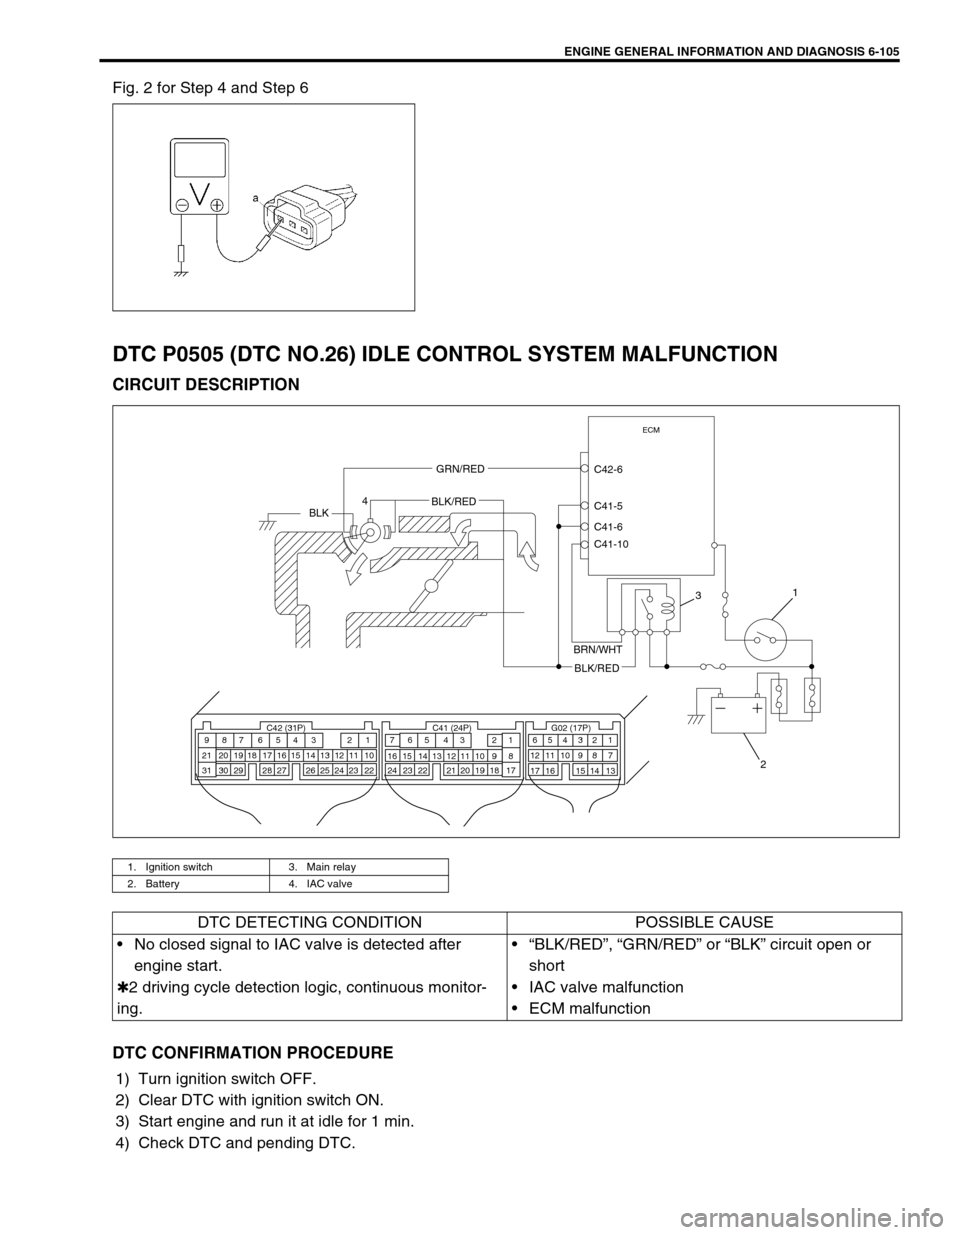 SUZUKI SWIFT 2000 1.G RG413 Service Workshop Manual ENGINE GENERAL INFORMATION AND DIAGNOSIS 6-105
Fig. 2 for Step 4 and Step 6
DTC P0505 (DTC NO.26) IDLE CONTROL SYSTEM MALFUNCTION
CIRCUIT DESCRIPTION
DTC CONFIRMATION PROCEDURE
1) Turn ignition switch